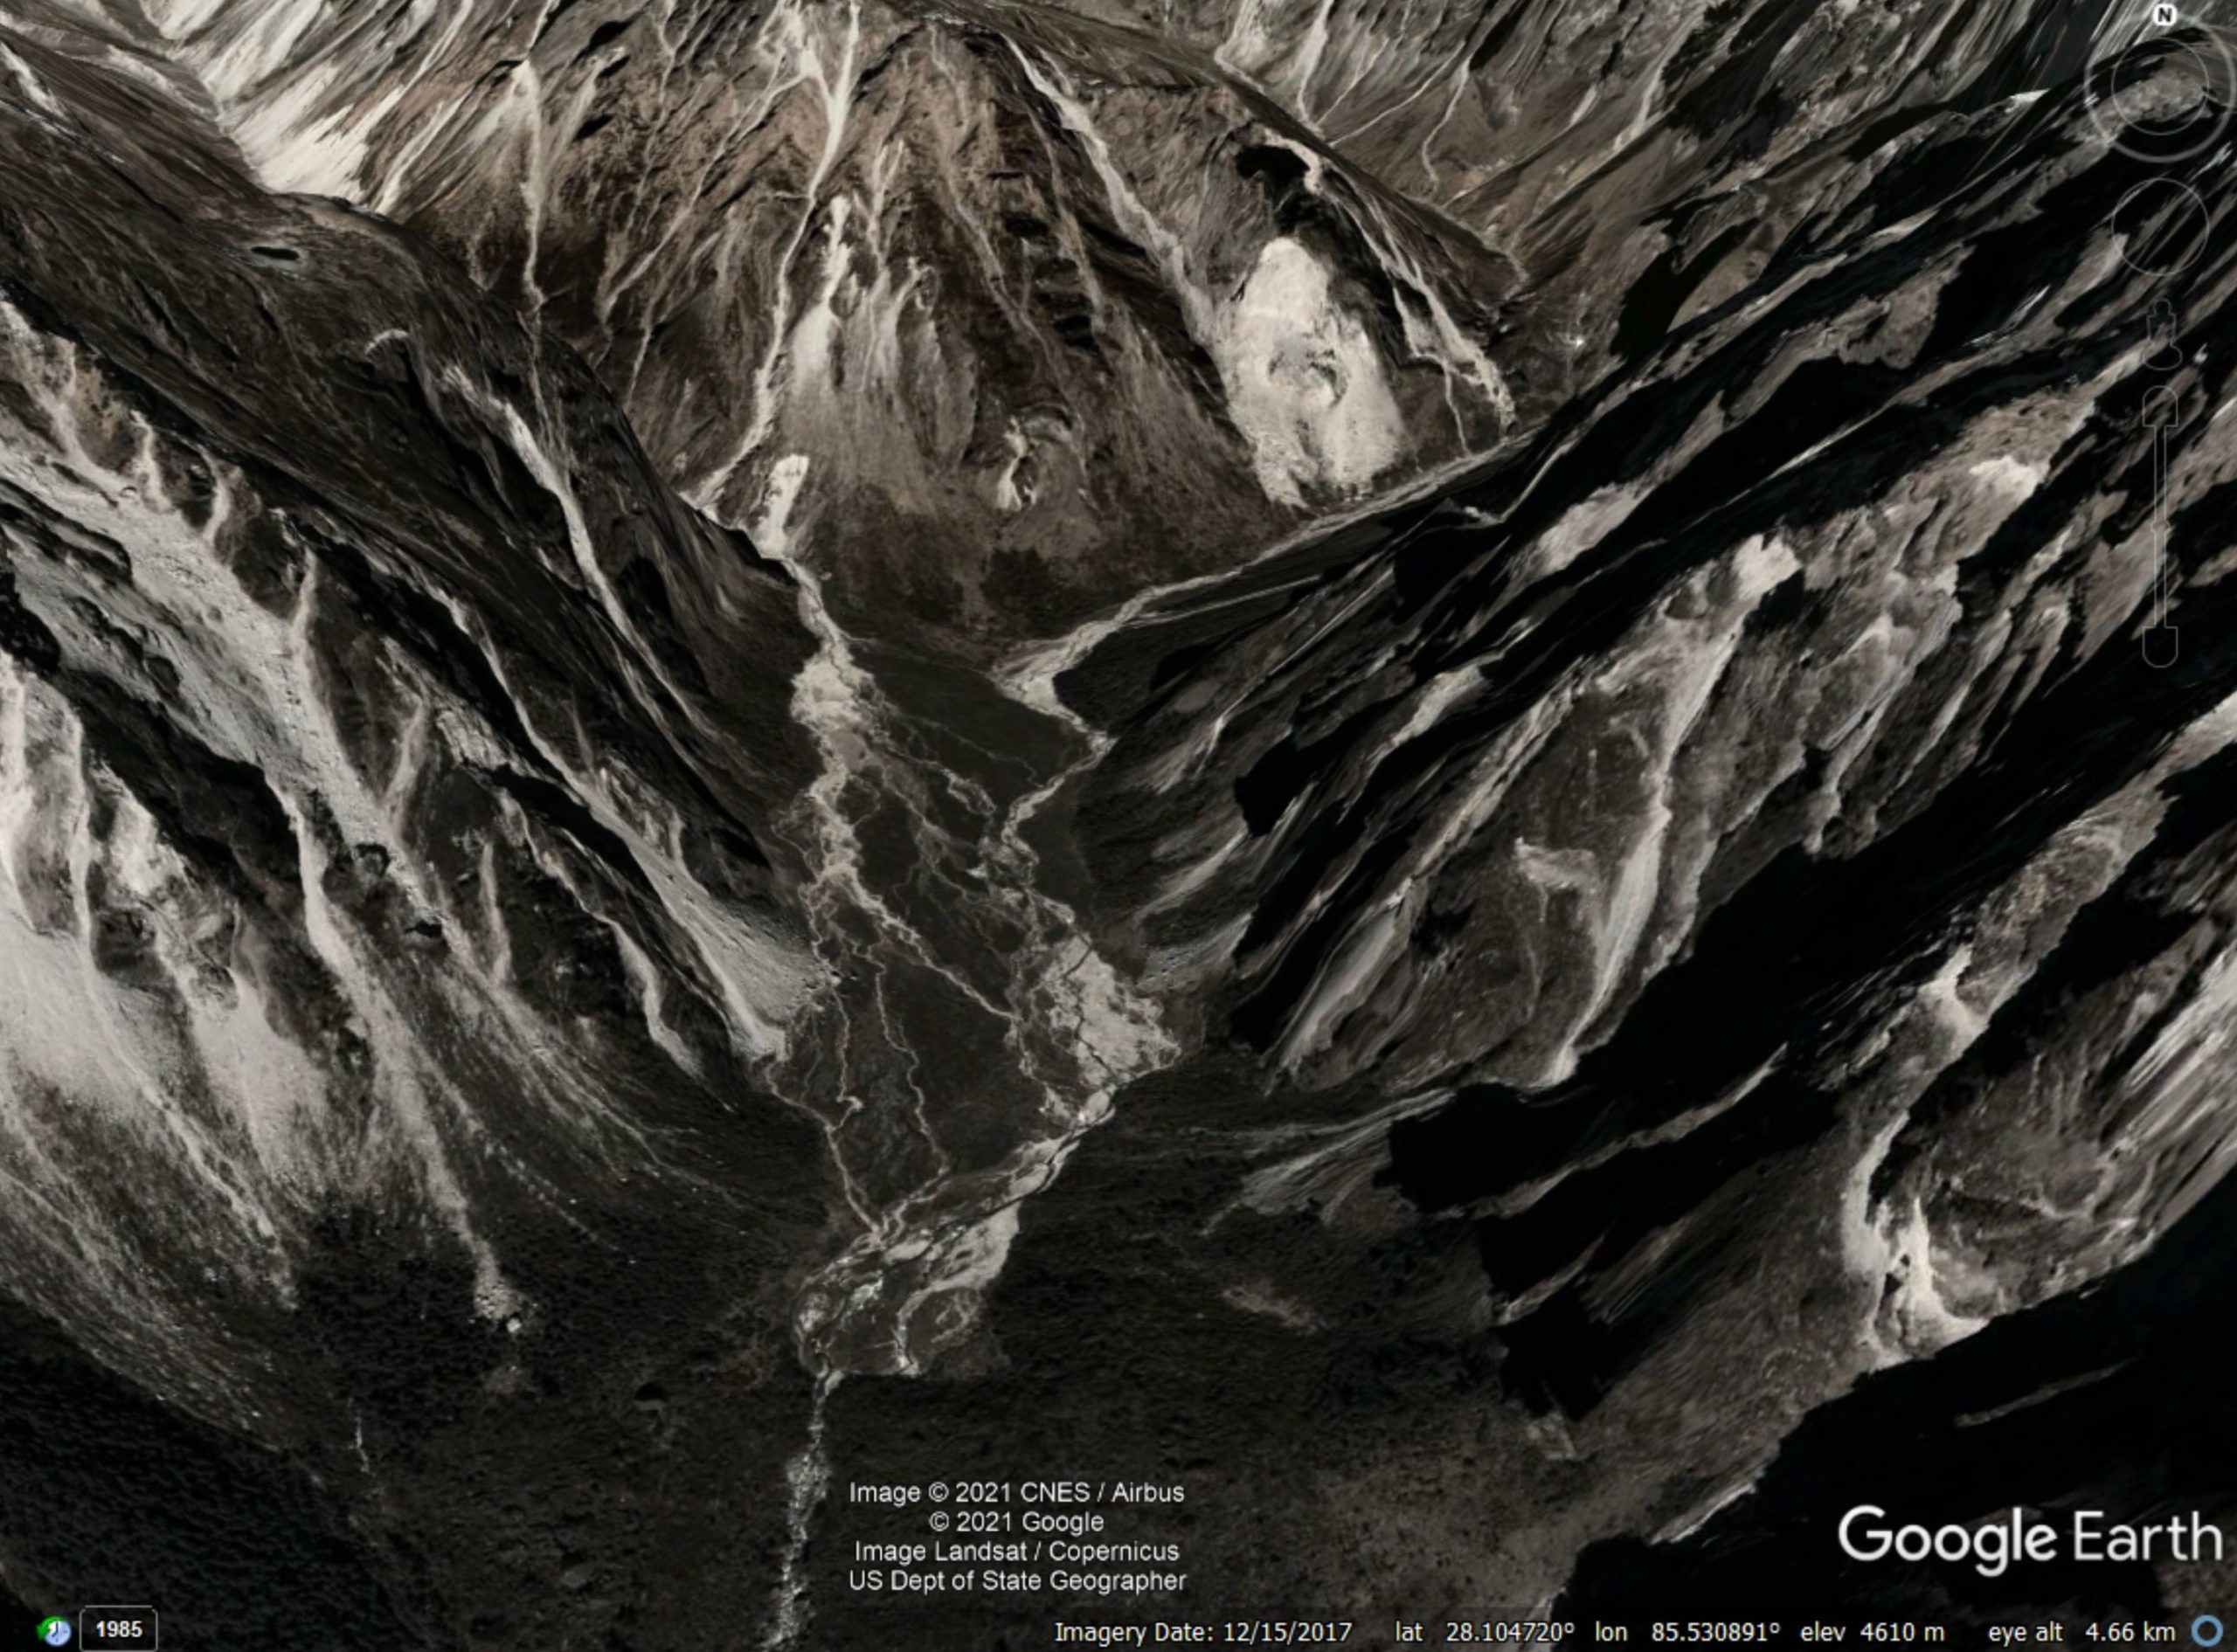 Google Earth image of the headwaters above Melamchi.